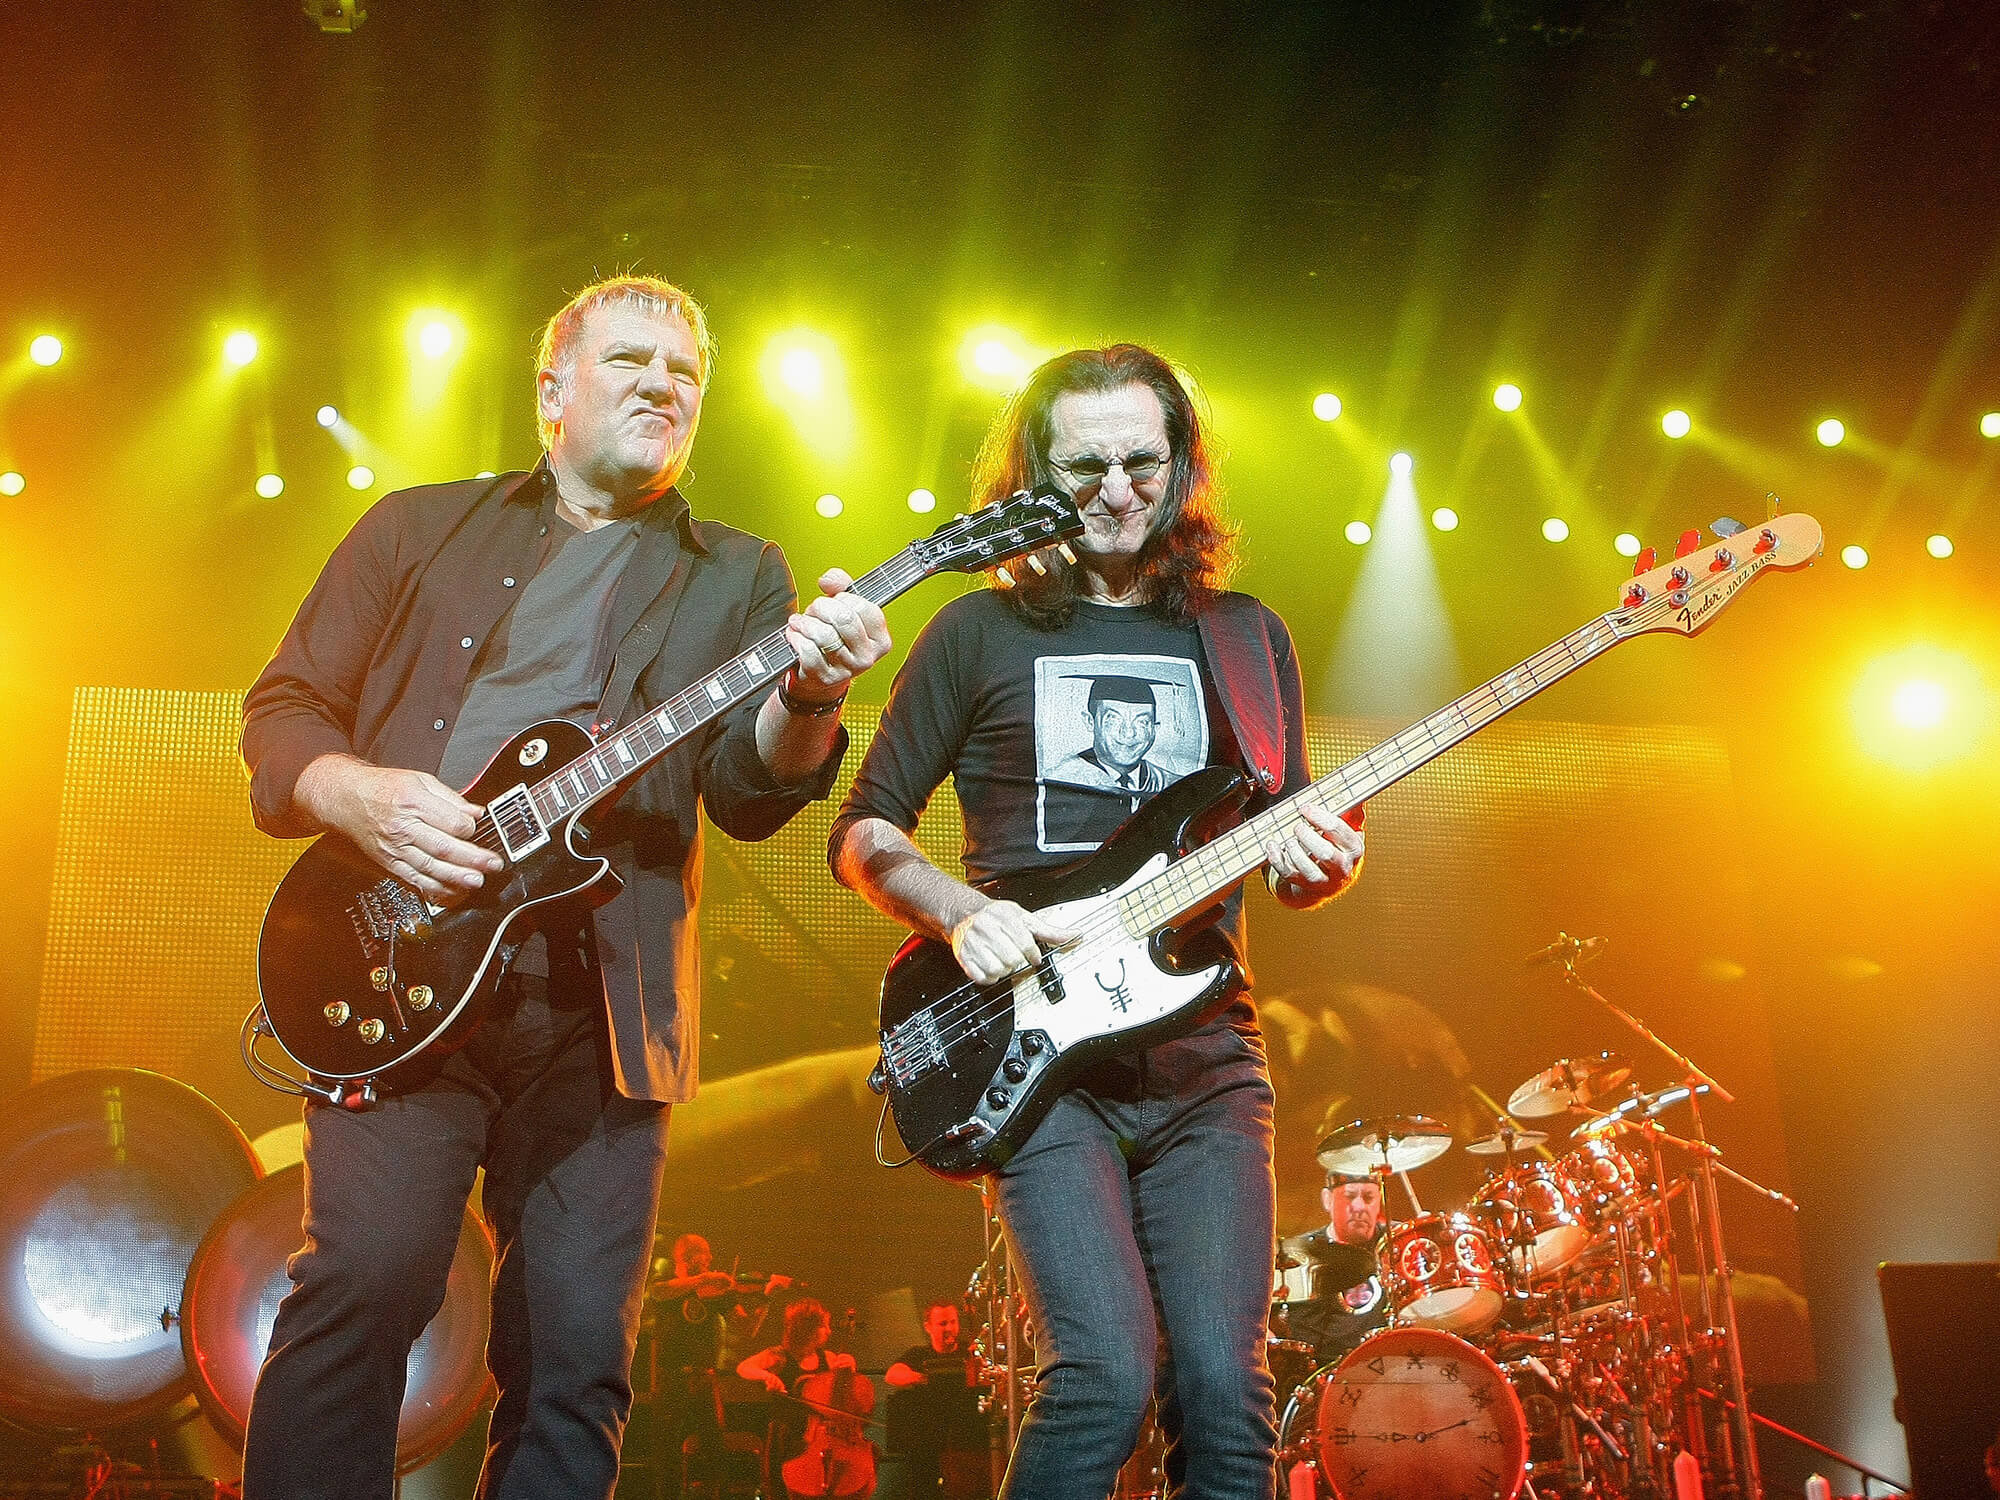 Alex Lifeson and Geddy Lee of Rush perform at HP Pavilion on November 15, 2012 in San Jose, California.